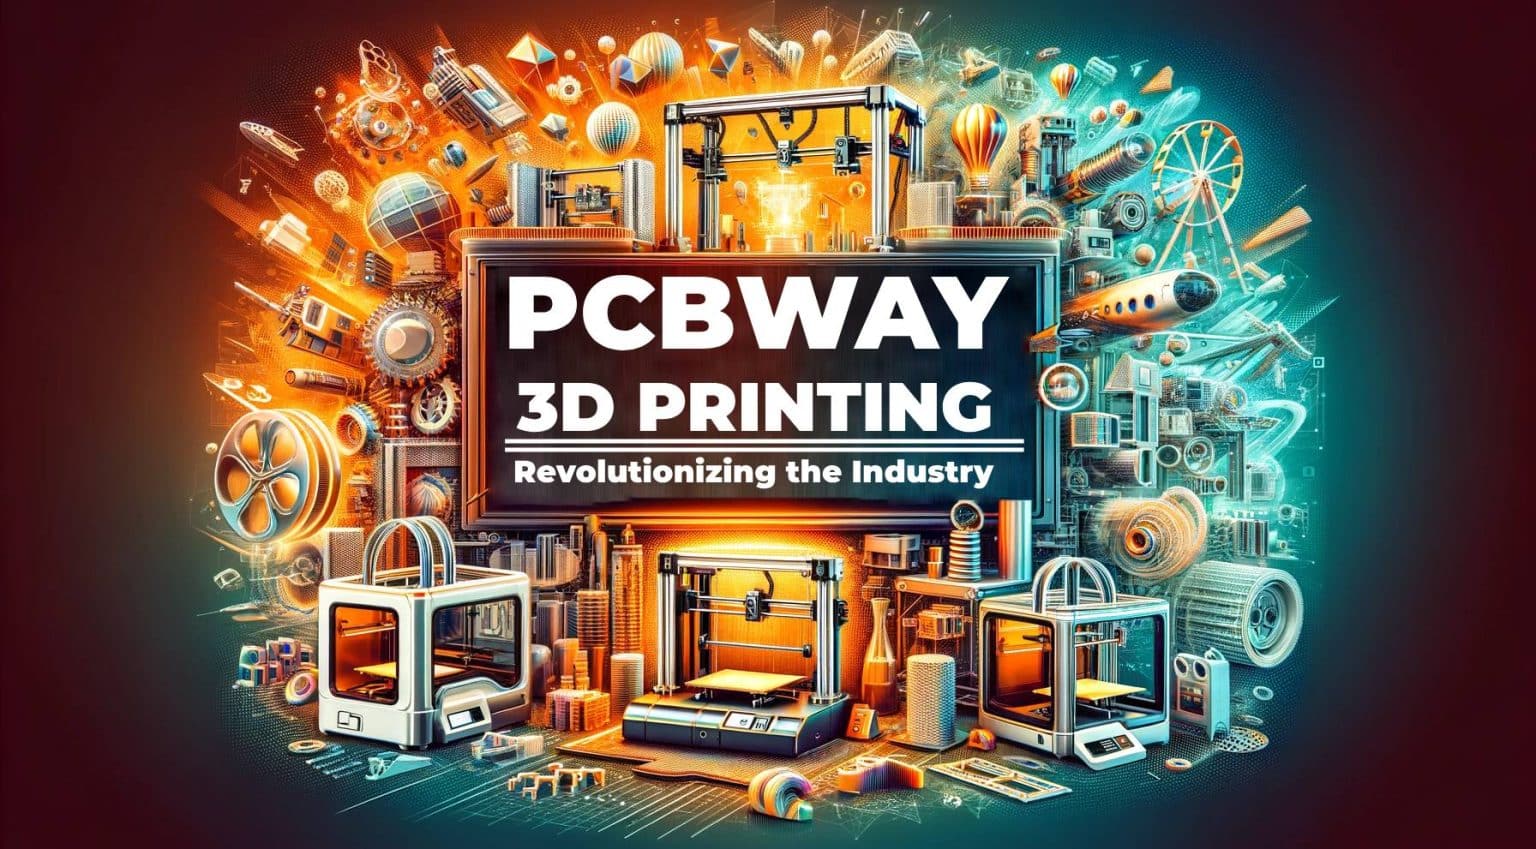 PCBWay 3D Printing Revolutionizing the Industry howto3Dprint.net Discover The World of 3D Print